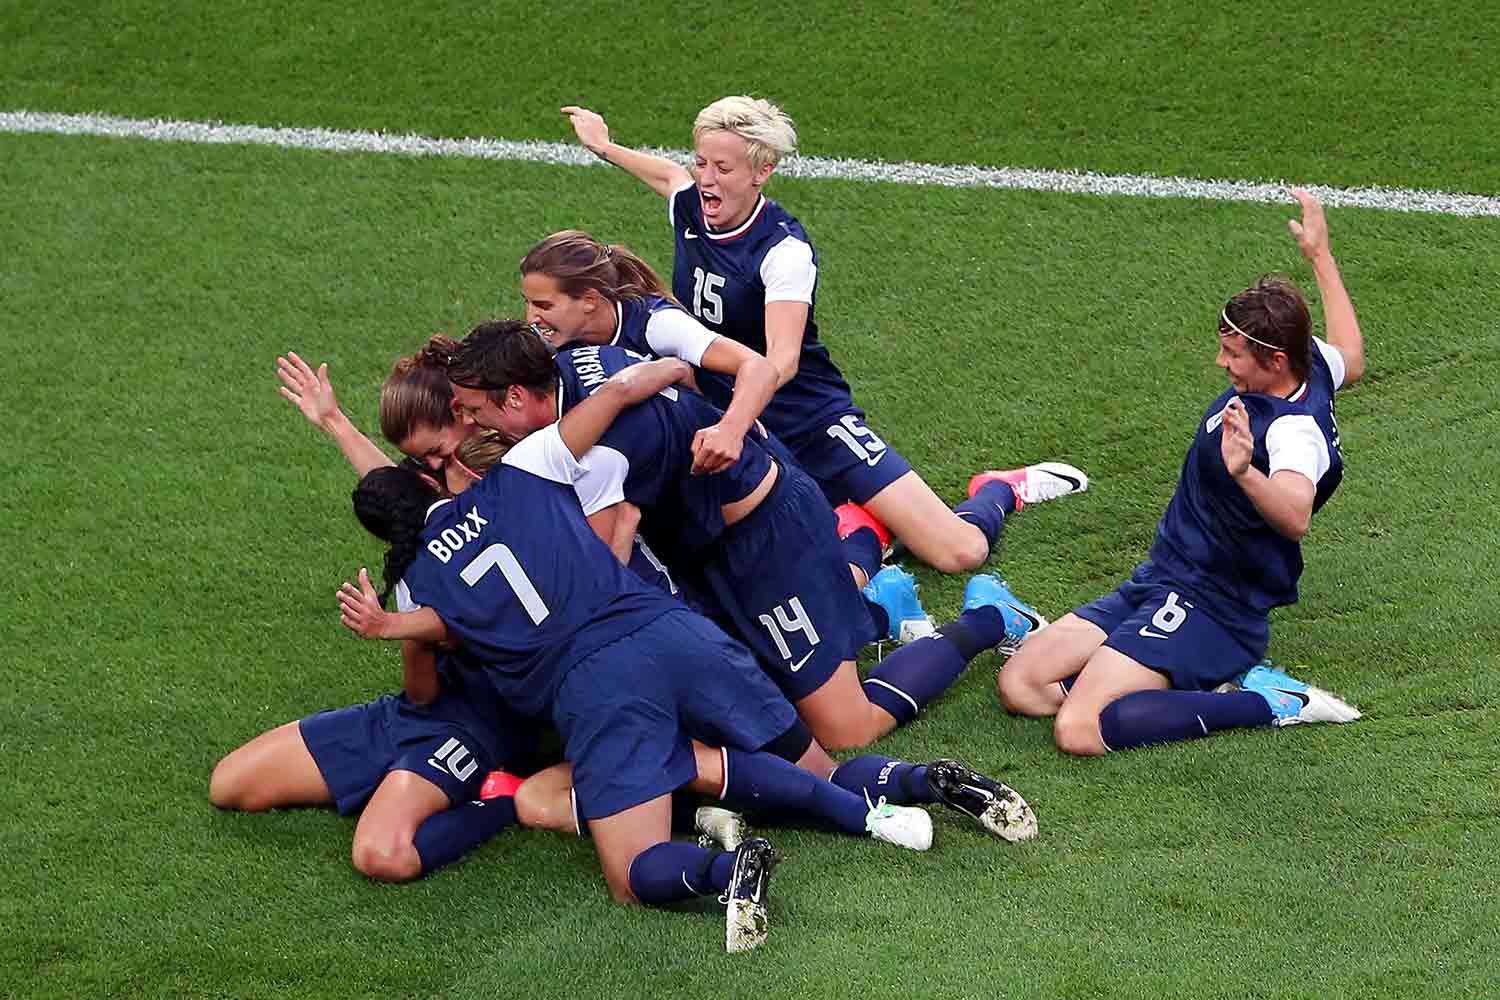 Soccer players cheering and hugging each other on a soccer field.